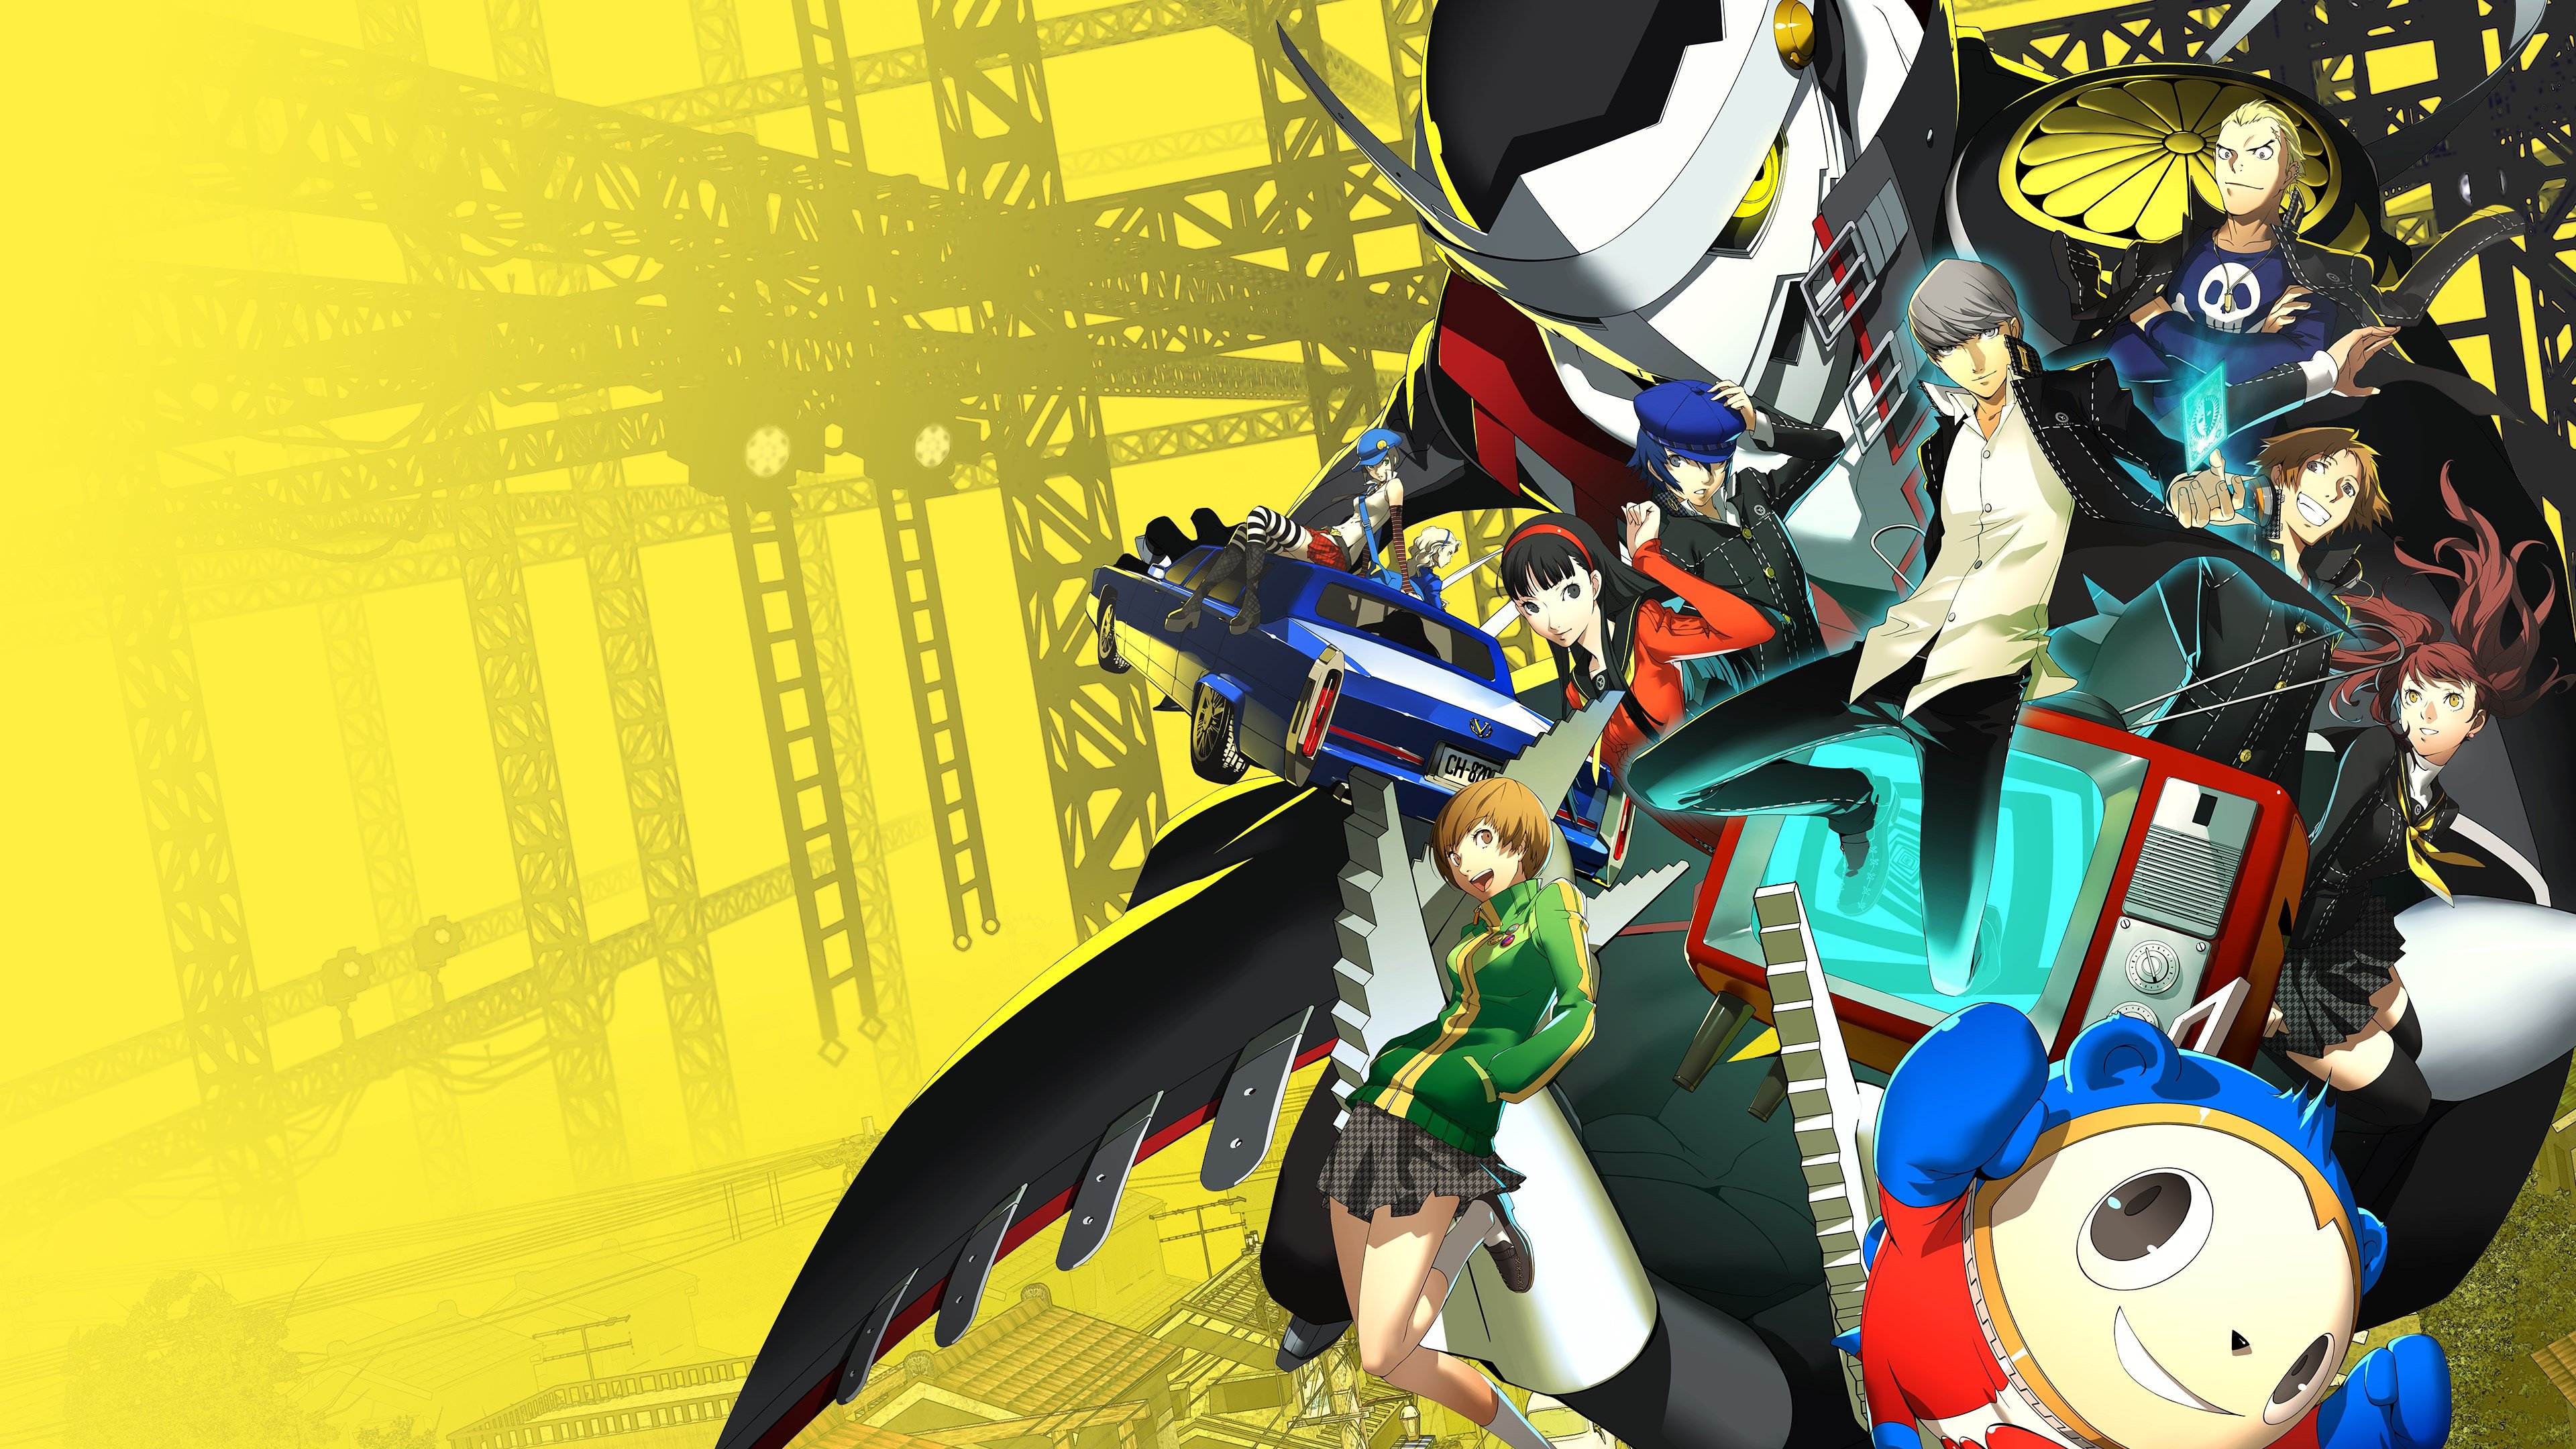 Persona 4 Golden cover image